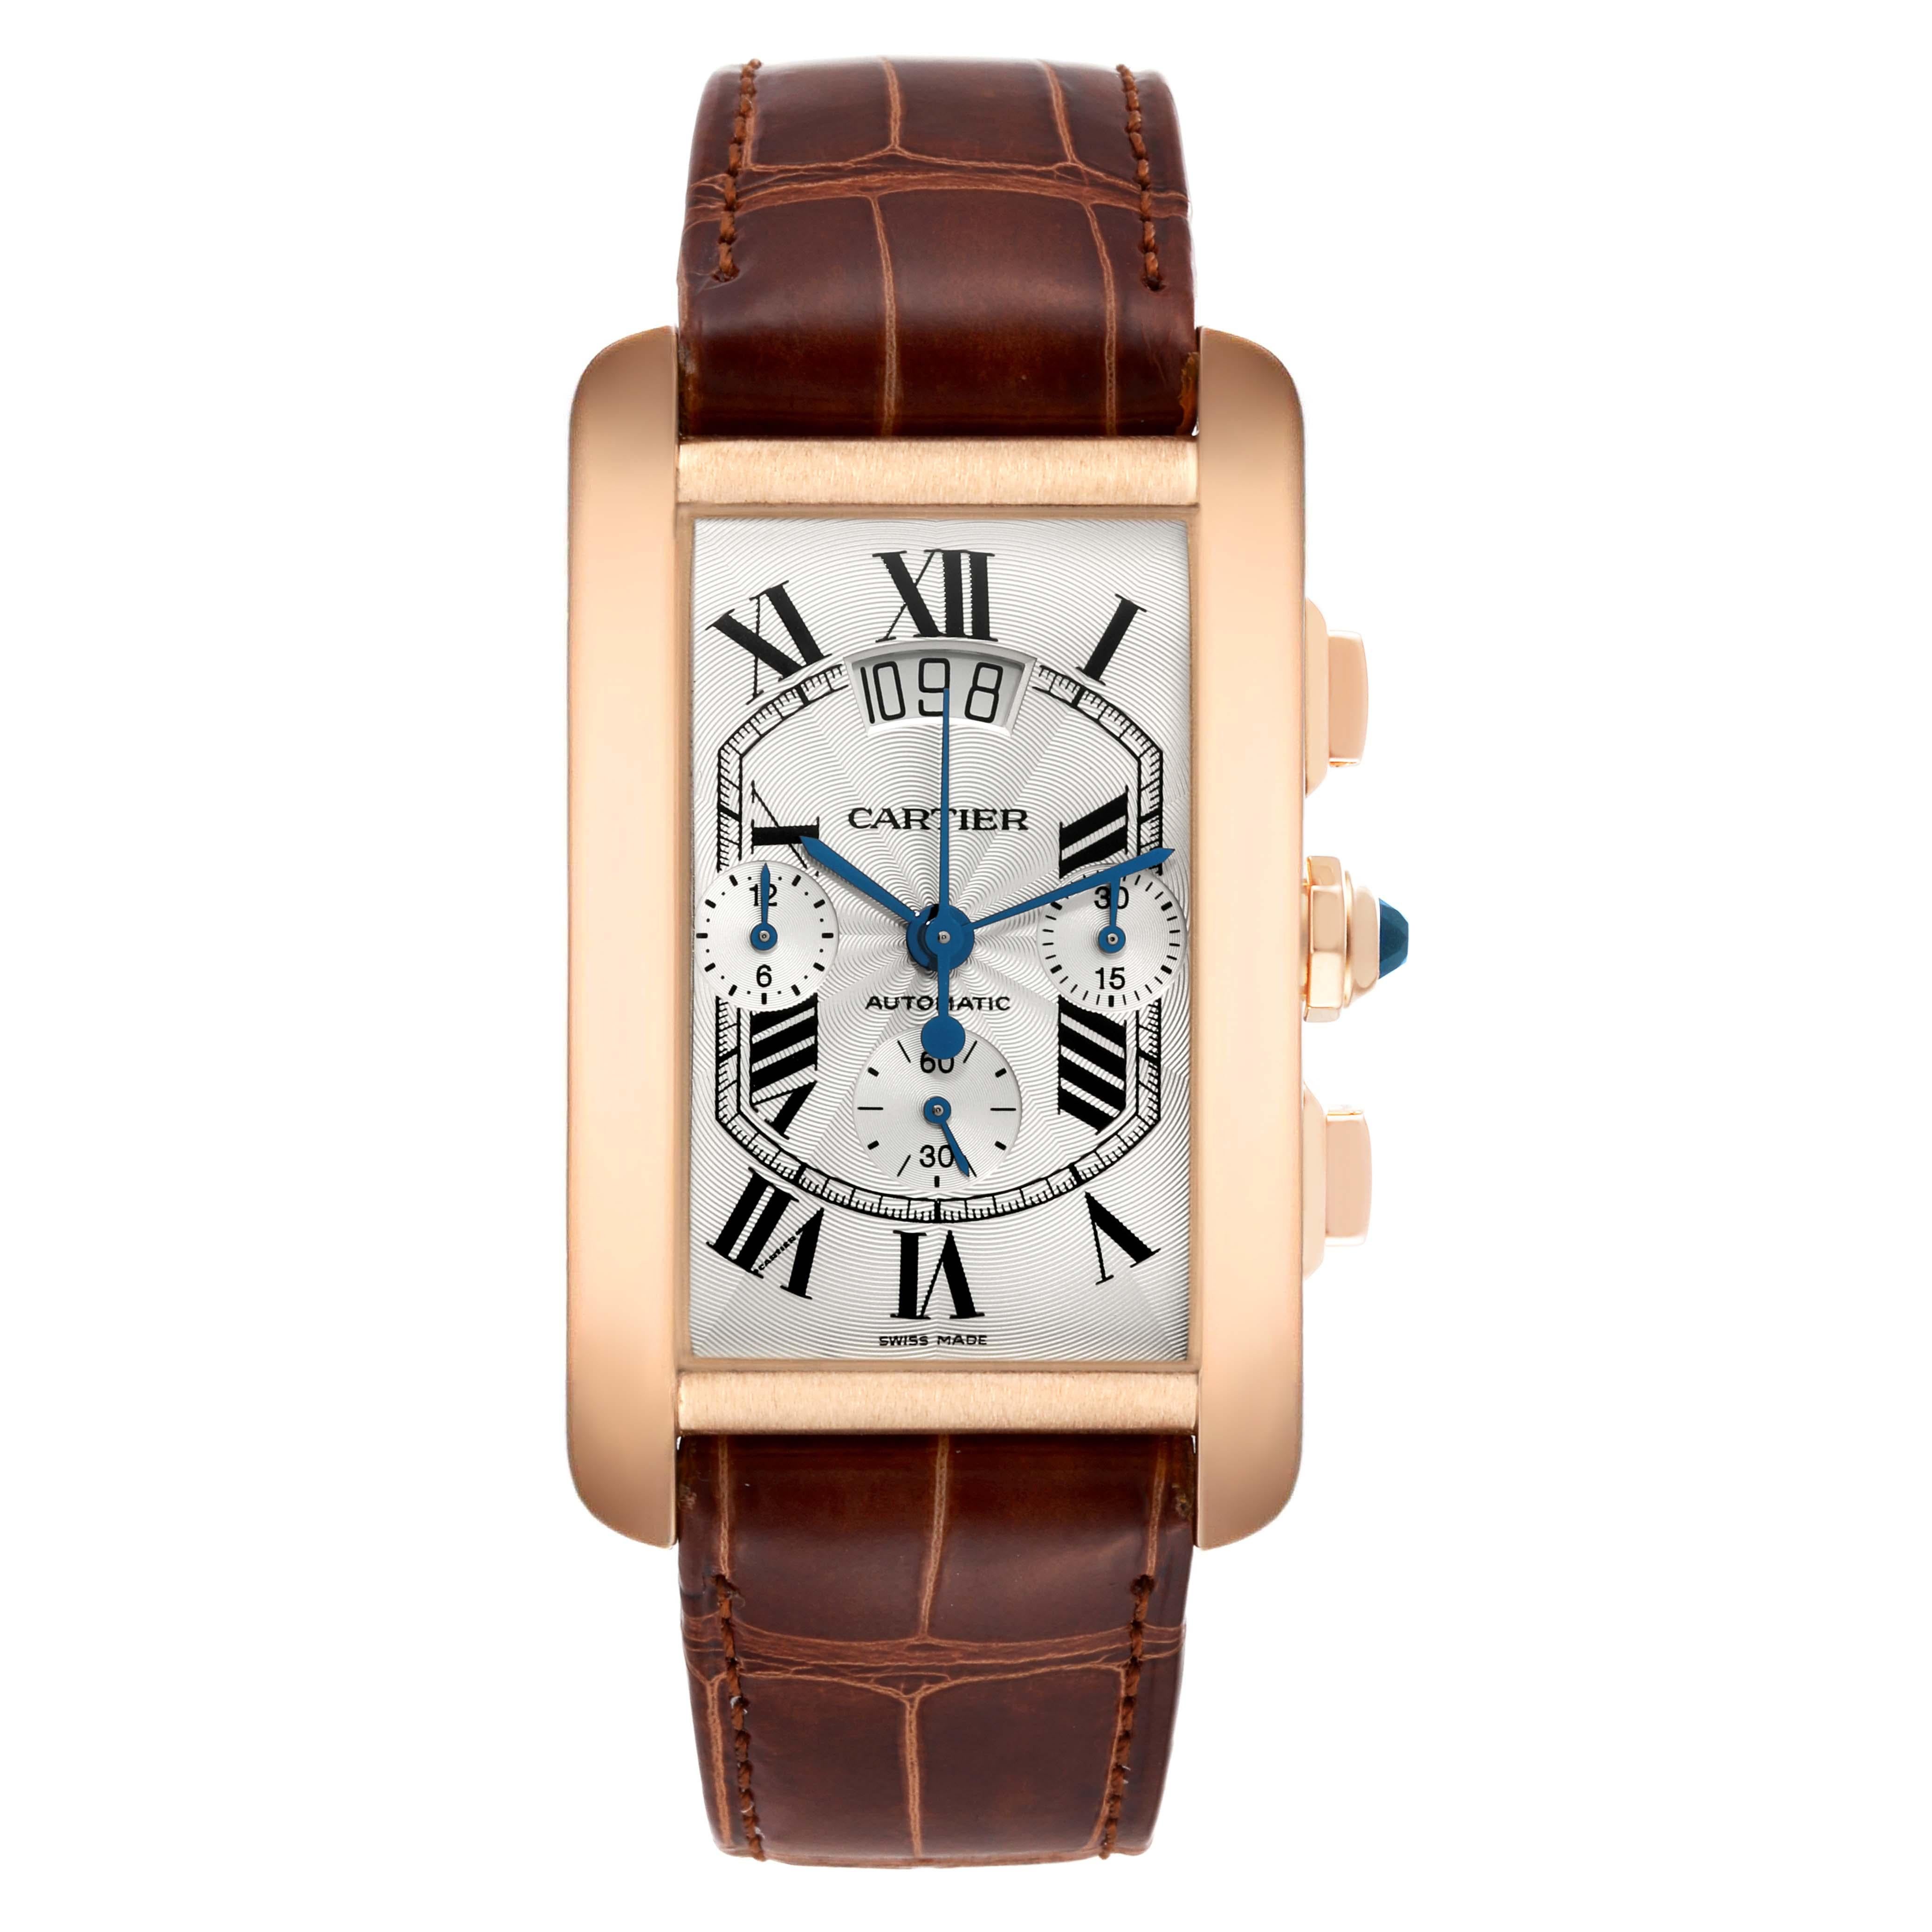 Cartier Tank Americaine XL Chronograph Rose Gold Mens Watch W2610751 Box Card. Automatic self-winding movement. 18k rose gold case 52.0 x 31.1 mm. Circular grained crown set with faceted blue sapphire. Transparent exhibition sapphire crystal